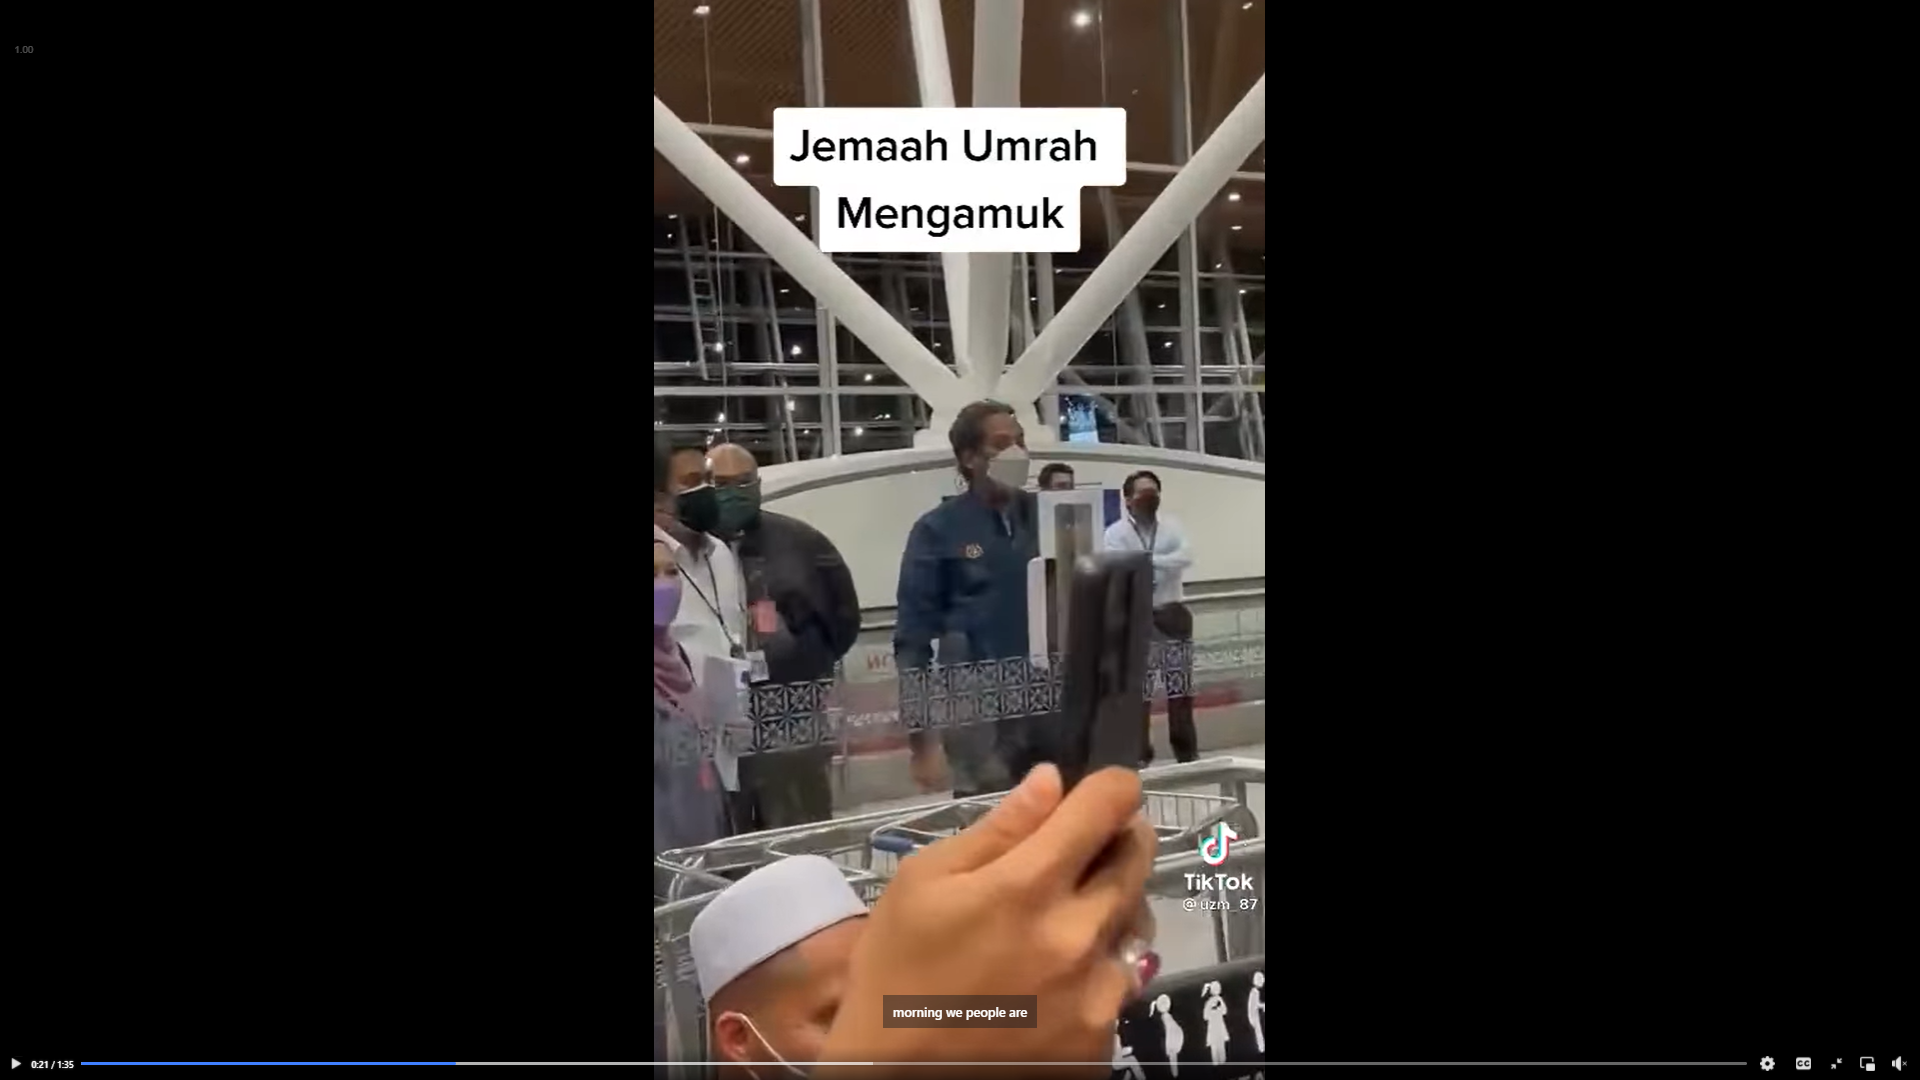 Tempers run high as 500 umrah pilgrims wait for hours to wear tracking devices at klia